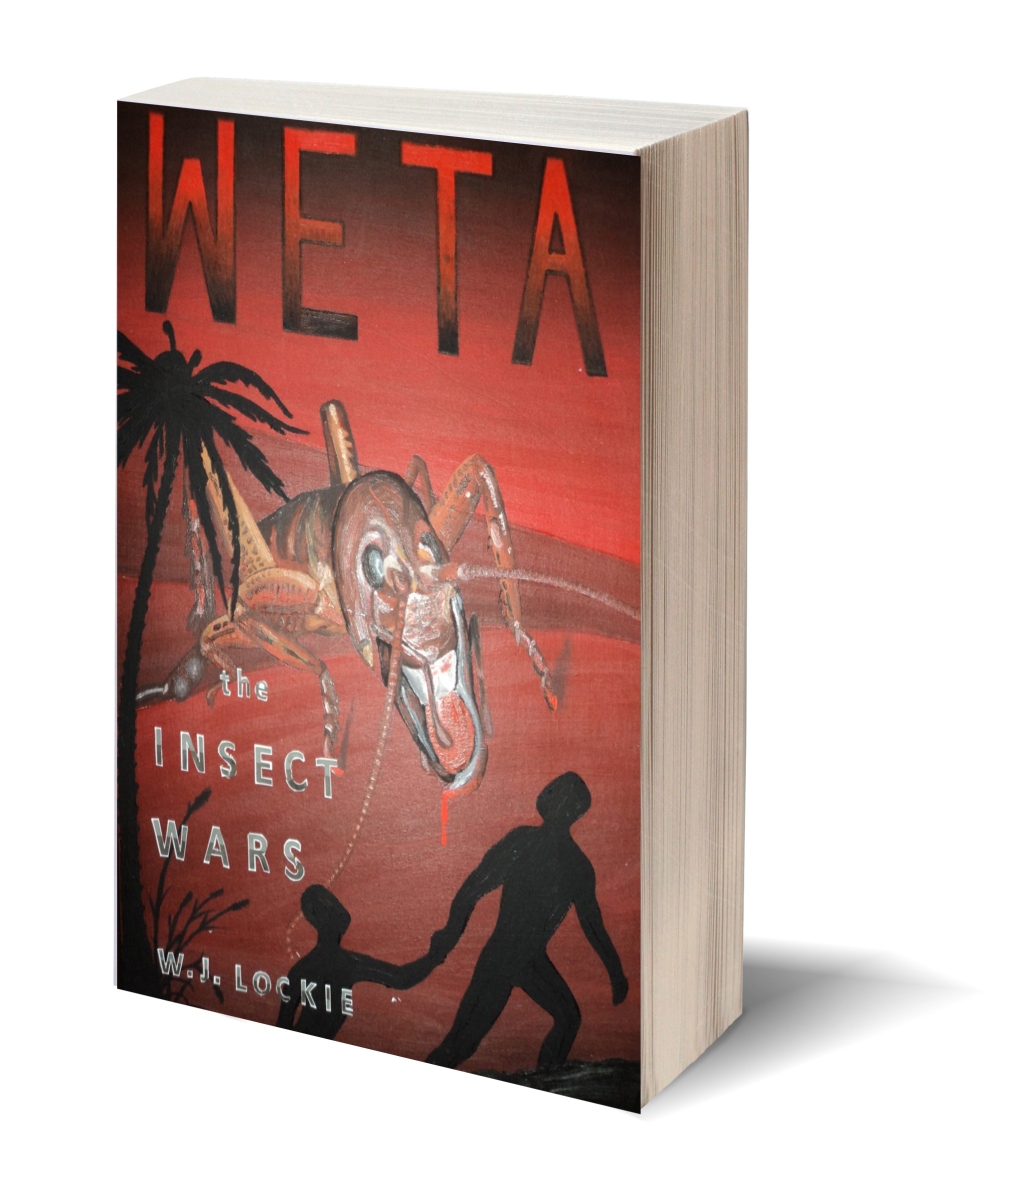 Weta the Insect Wars